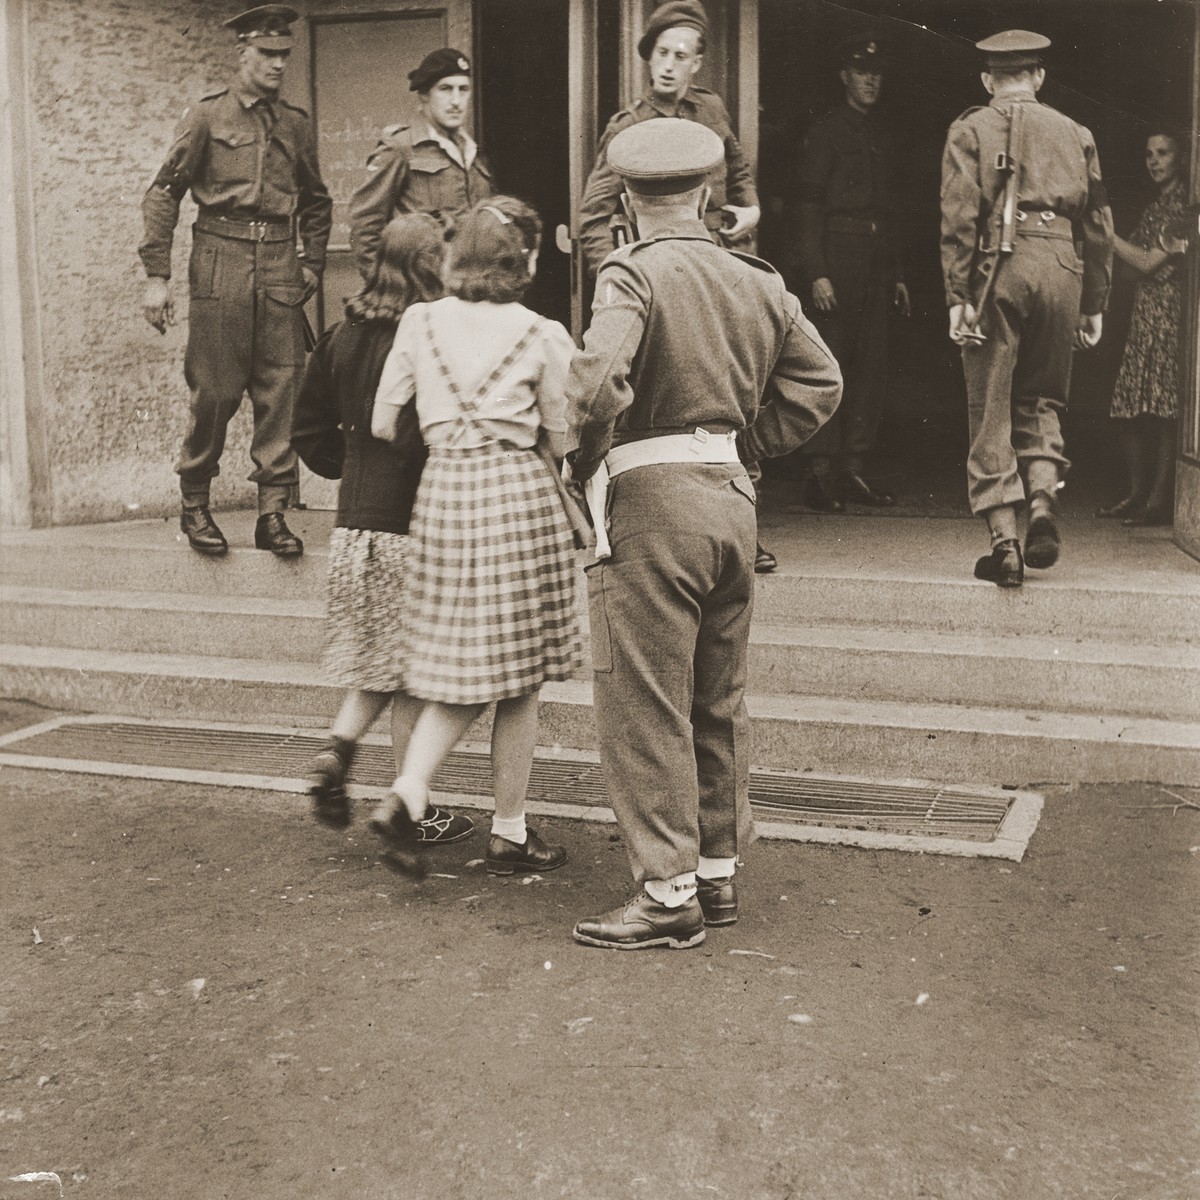 Two German girls from Burgsteinfurt, who laughed when they came out of the cinema showing a film about the concentration camps, are ordered back in to see the film again. 

Burgsteinfurt was called the "village of hate" in the B.L.A. magazine, "The Soldier," because of its silent but noticeable resentment of the British occupation.  The military government began the screening of a documentary on the concentration camps on May 29.  When few residents came voluntarily to view the film, the British military authorities ordered all 4,000 townsmen to attend showings.  They were assembled and marched to the cinema, led by the Mayor and Captain A. Stirling, the District Assistant Provost Marshal.